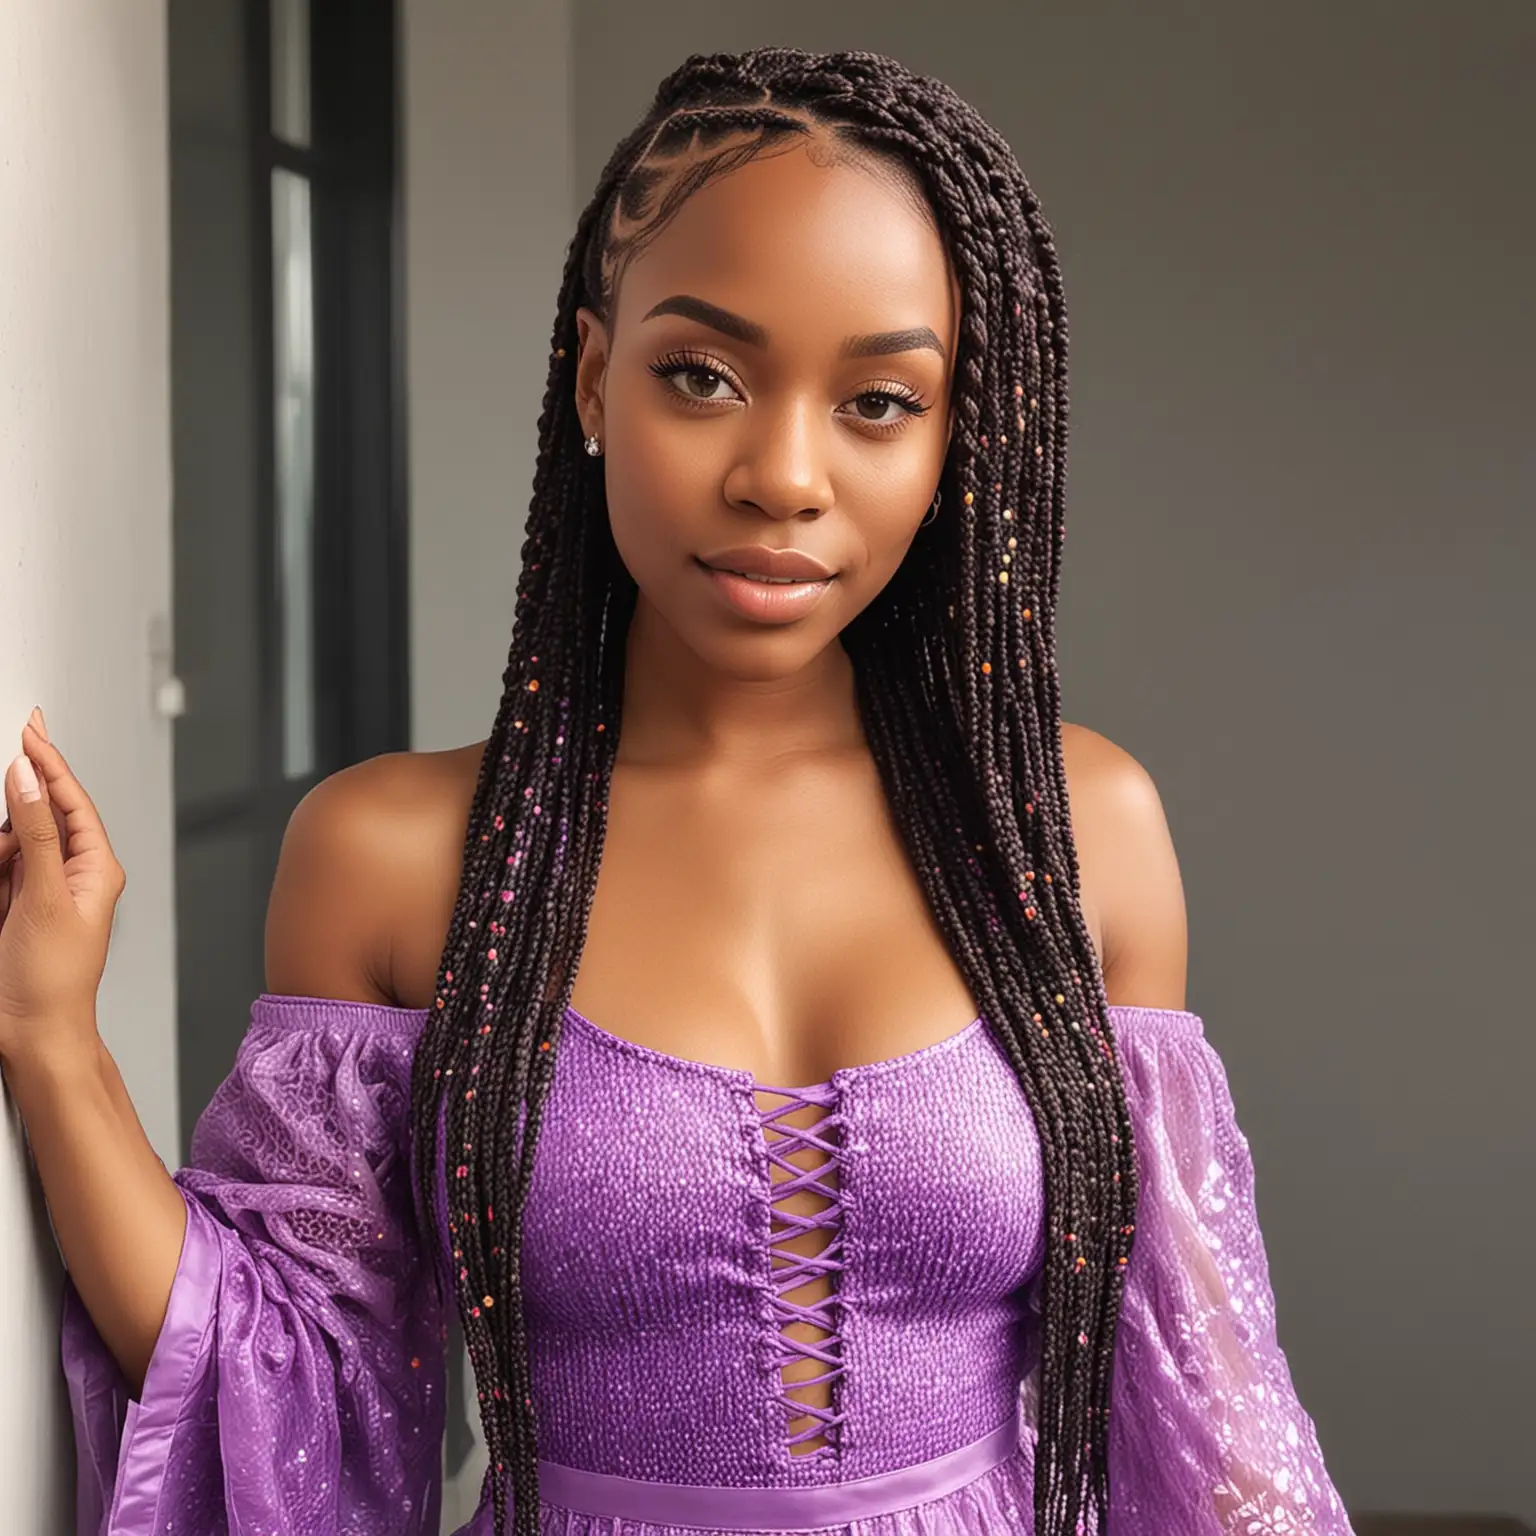 Sunkissed Black Woman in Purple Fairy Dress with Box Braids